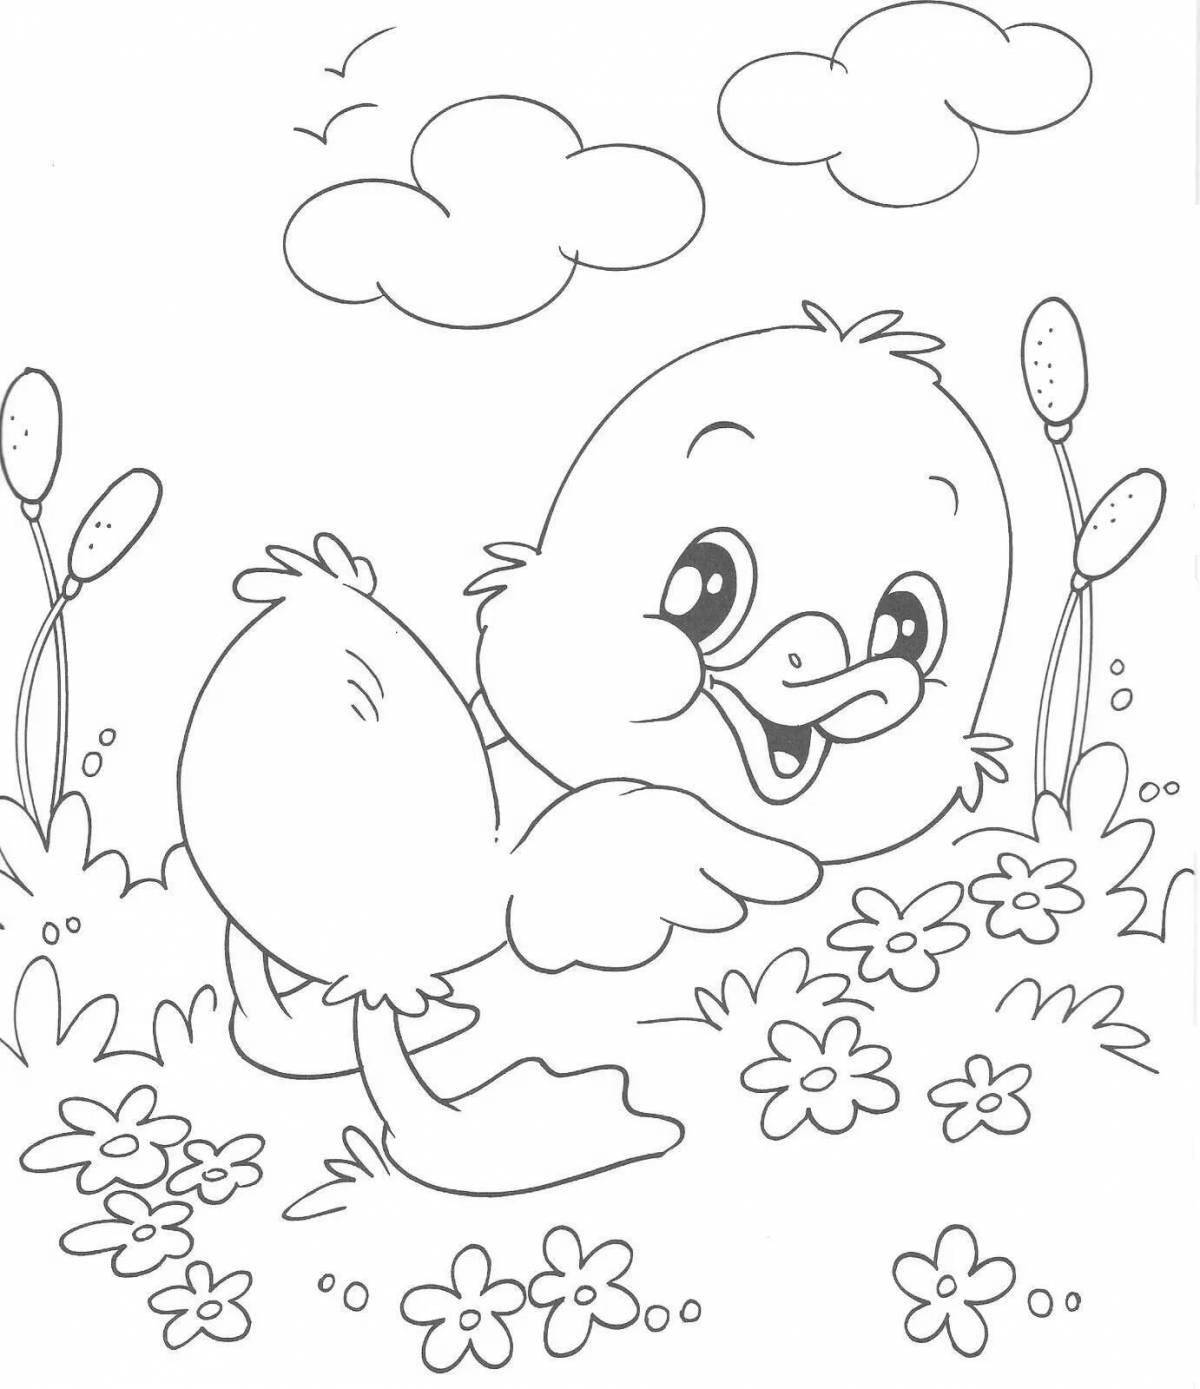 Coloring page loving squeezing duck